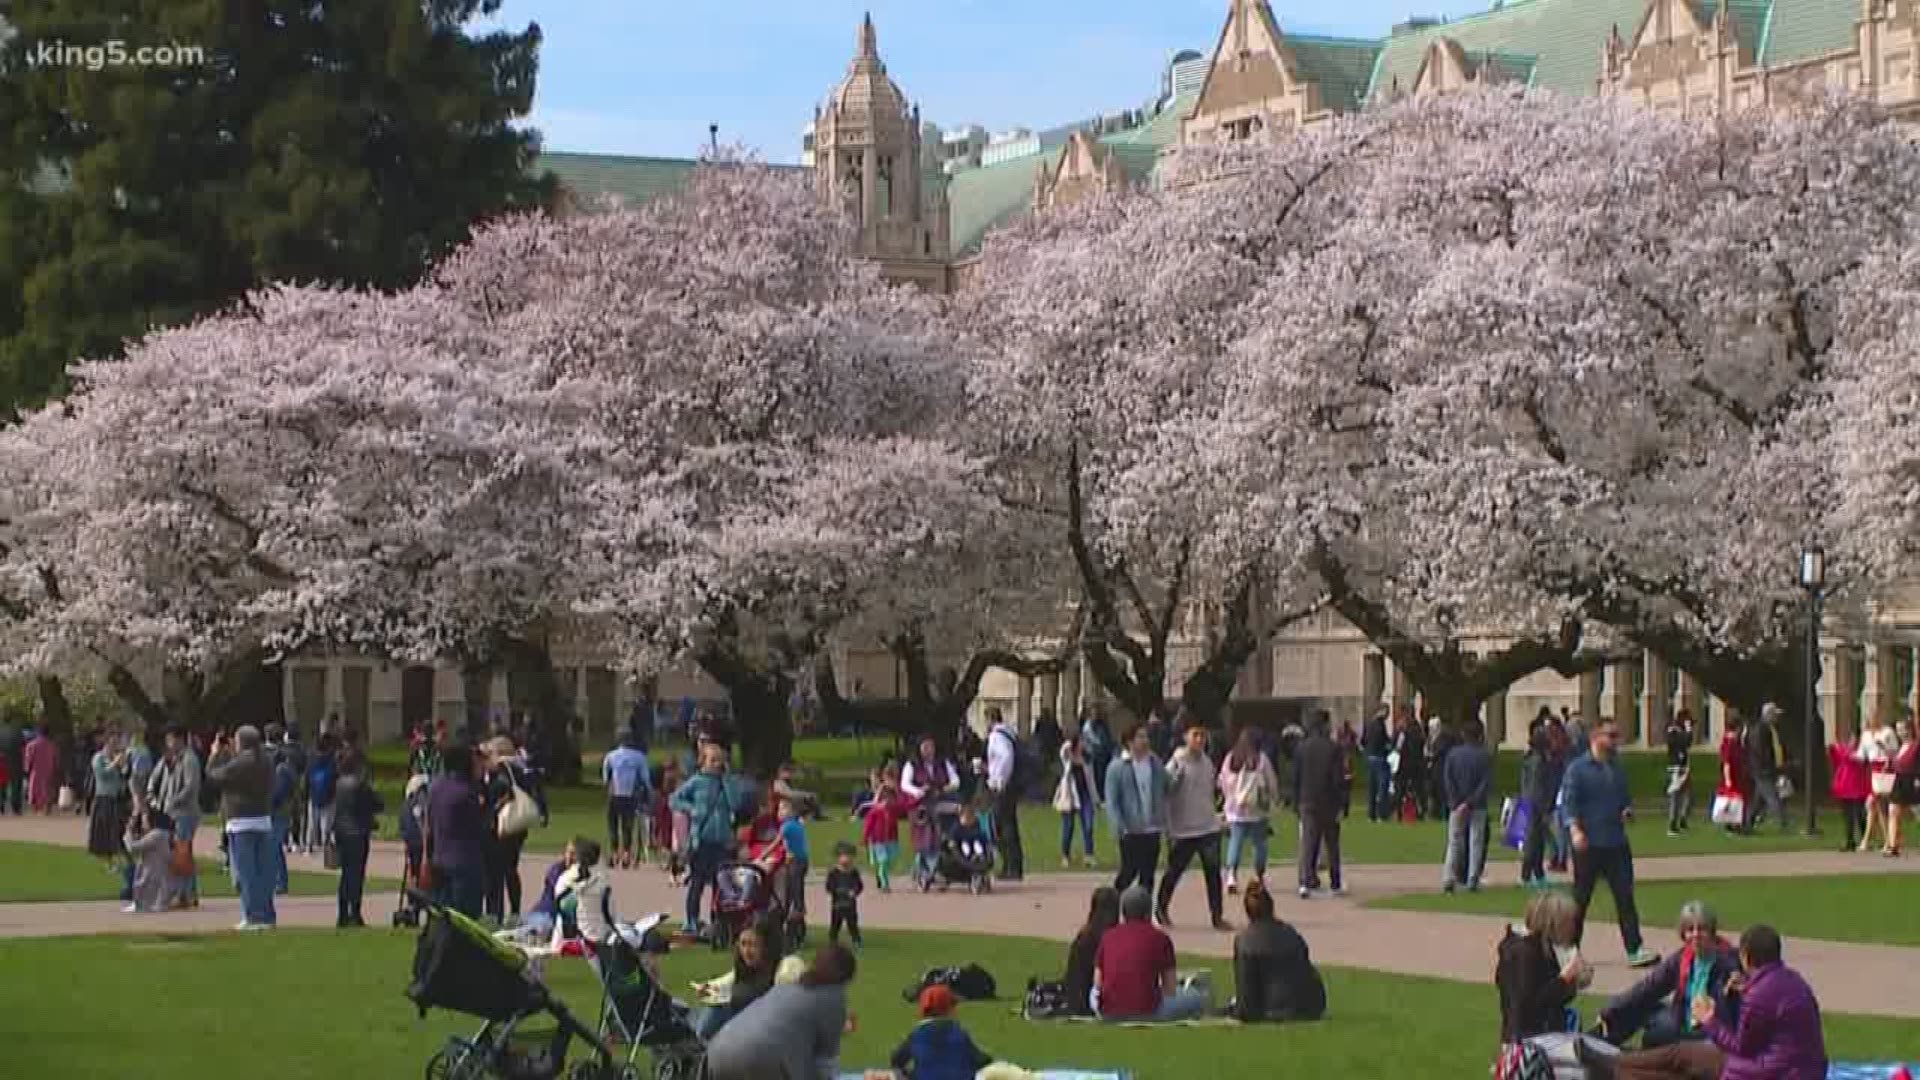 We know to expect a display of blooms in March or April, but pinning down exact dates for peak bloom can be tricky. A team of UW researchers hopes to change that. KING 5's Ted Land reports